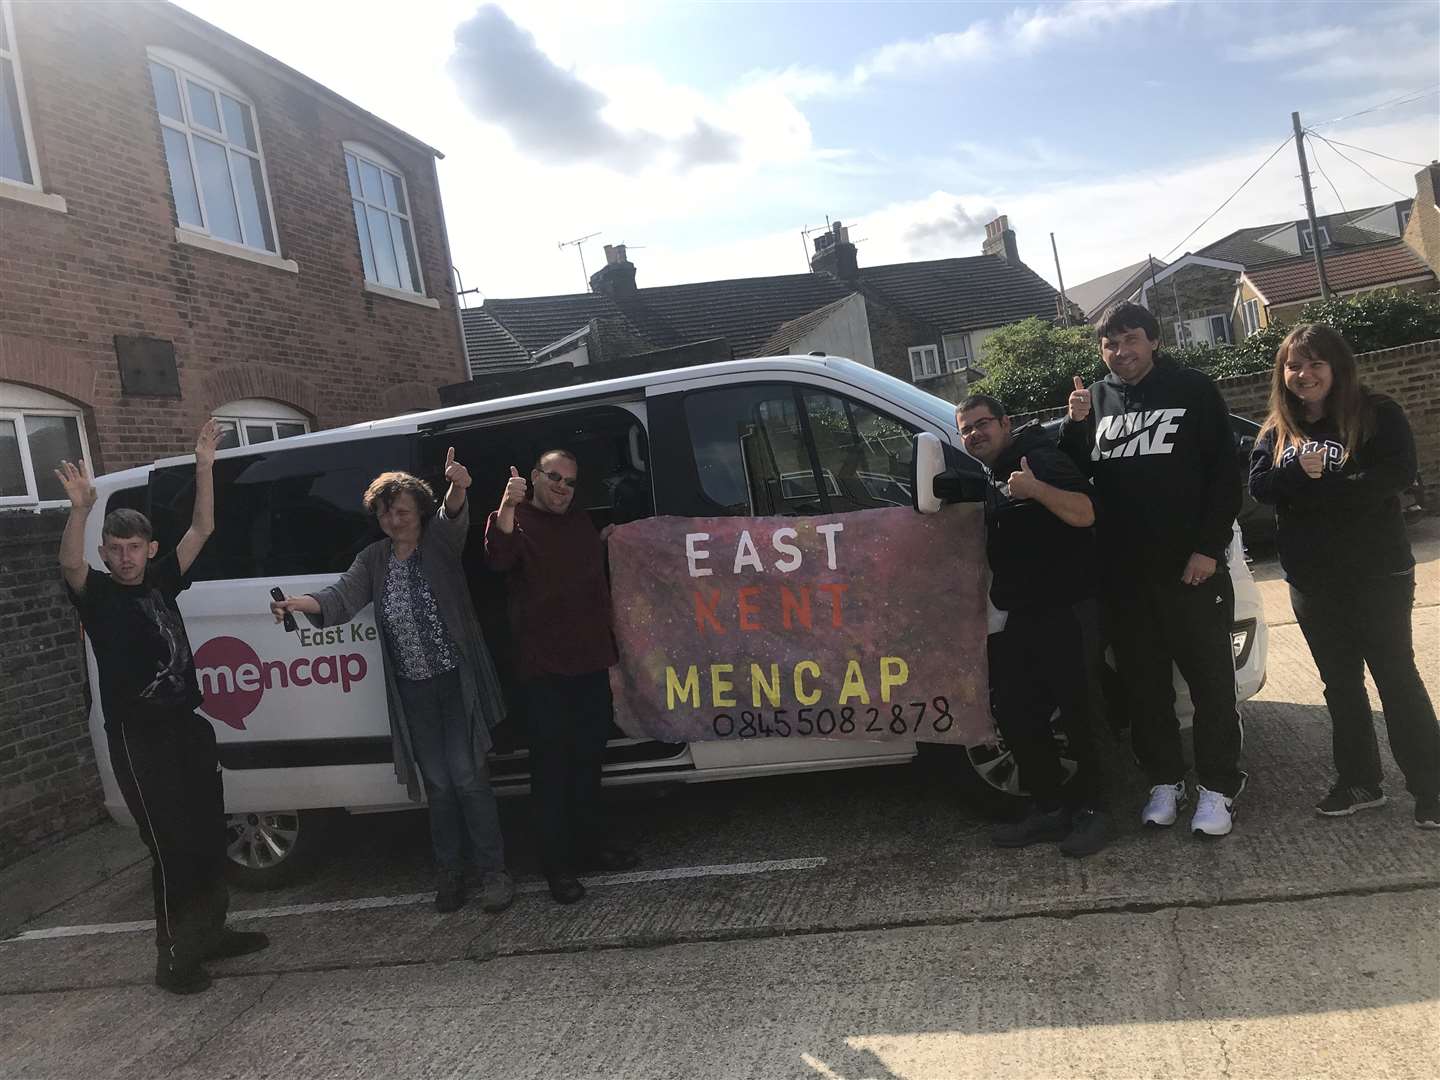 East Kent Mencap could risk losing its minibus if it doesn’t find a more suitable parking space for it